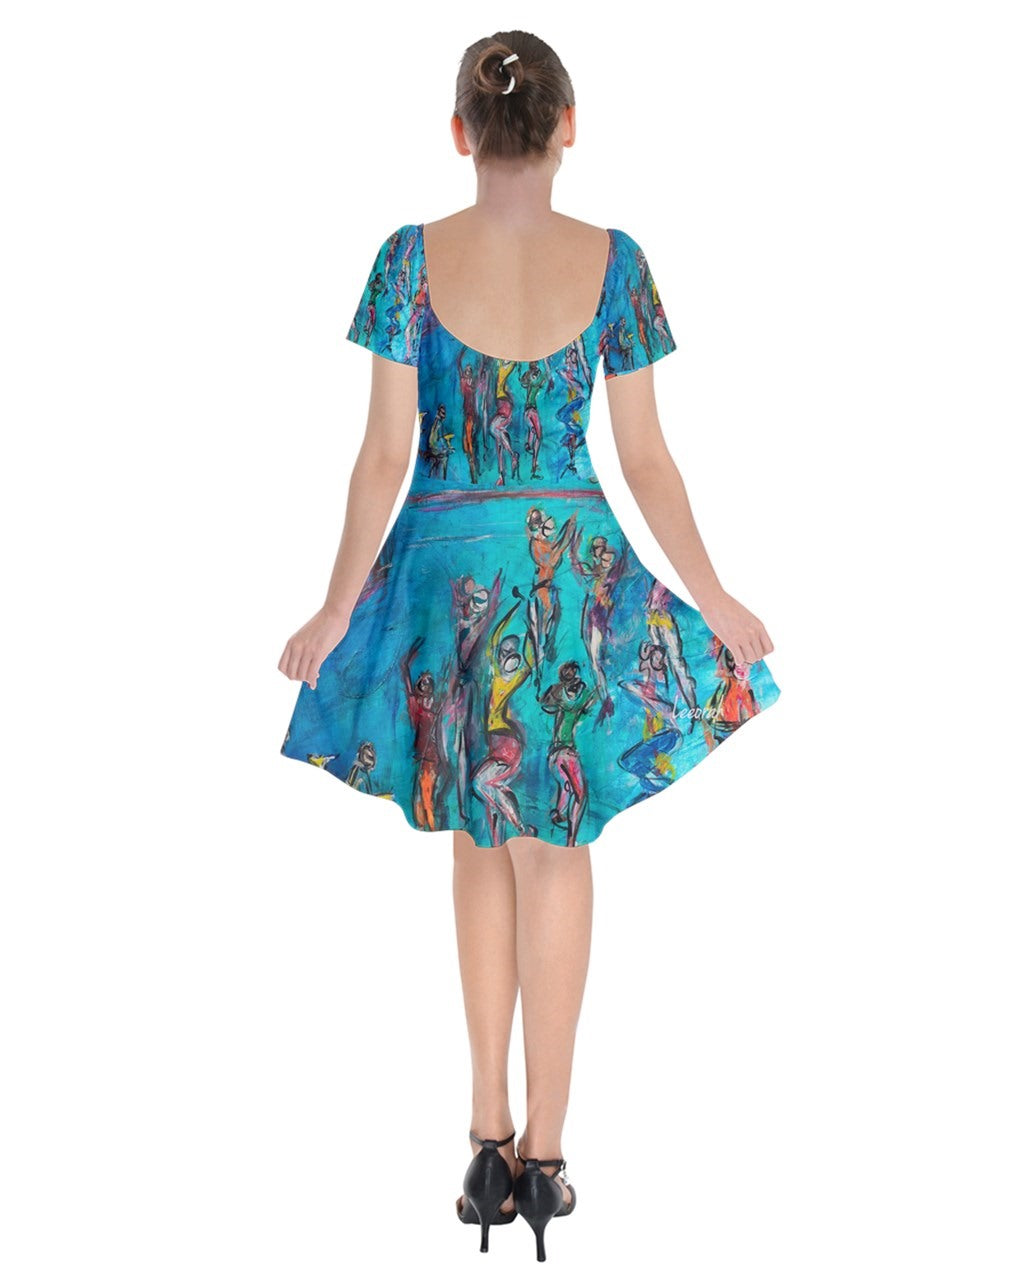 An image featuring women in blue dress adorned in striking,sexy attire adorned with vibrant, original artwork inspired by dancers, seen from the back